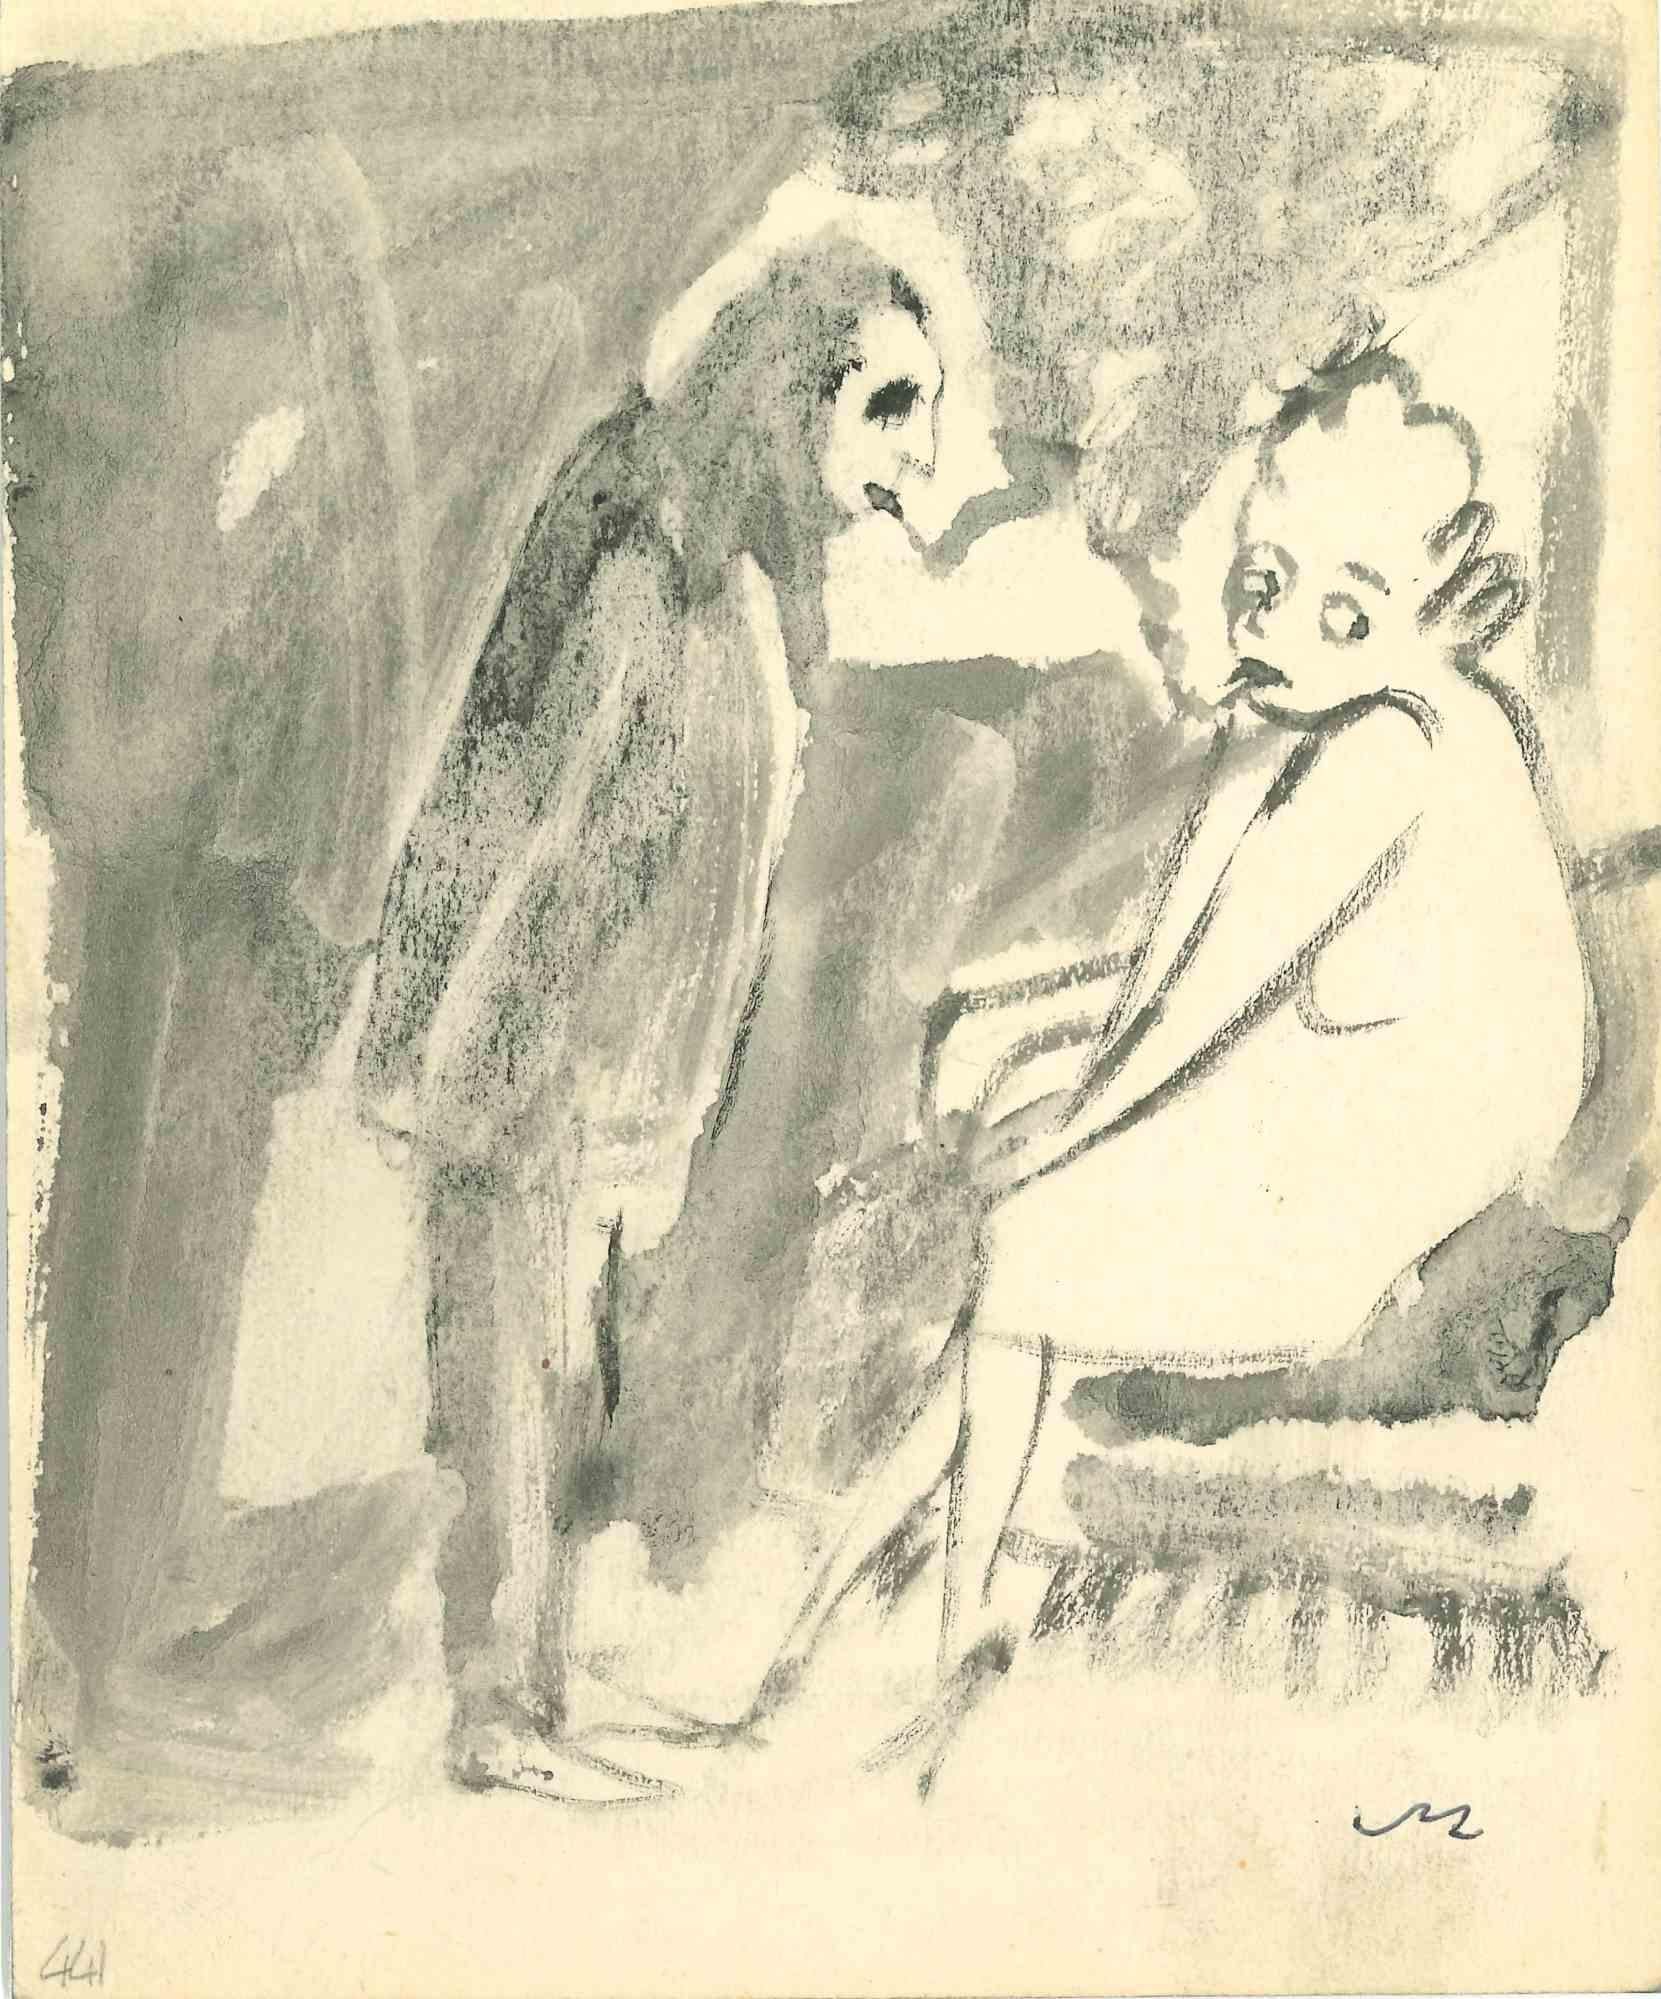 Smokers is a Watercolor drawing realized by Mino Maccari  (1924-1989) in the 1940s.

Monogrammed on the lower.

Good condition.

Mino Maccari (Siena, 1924-Rome, June 16, 1989) was an Italian writer, painter, engraver and journalist, winner of the